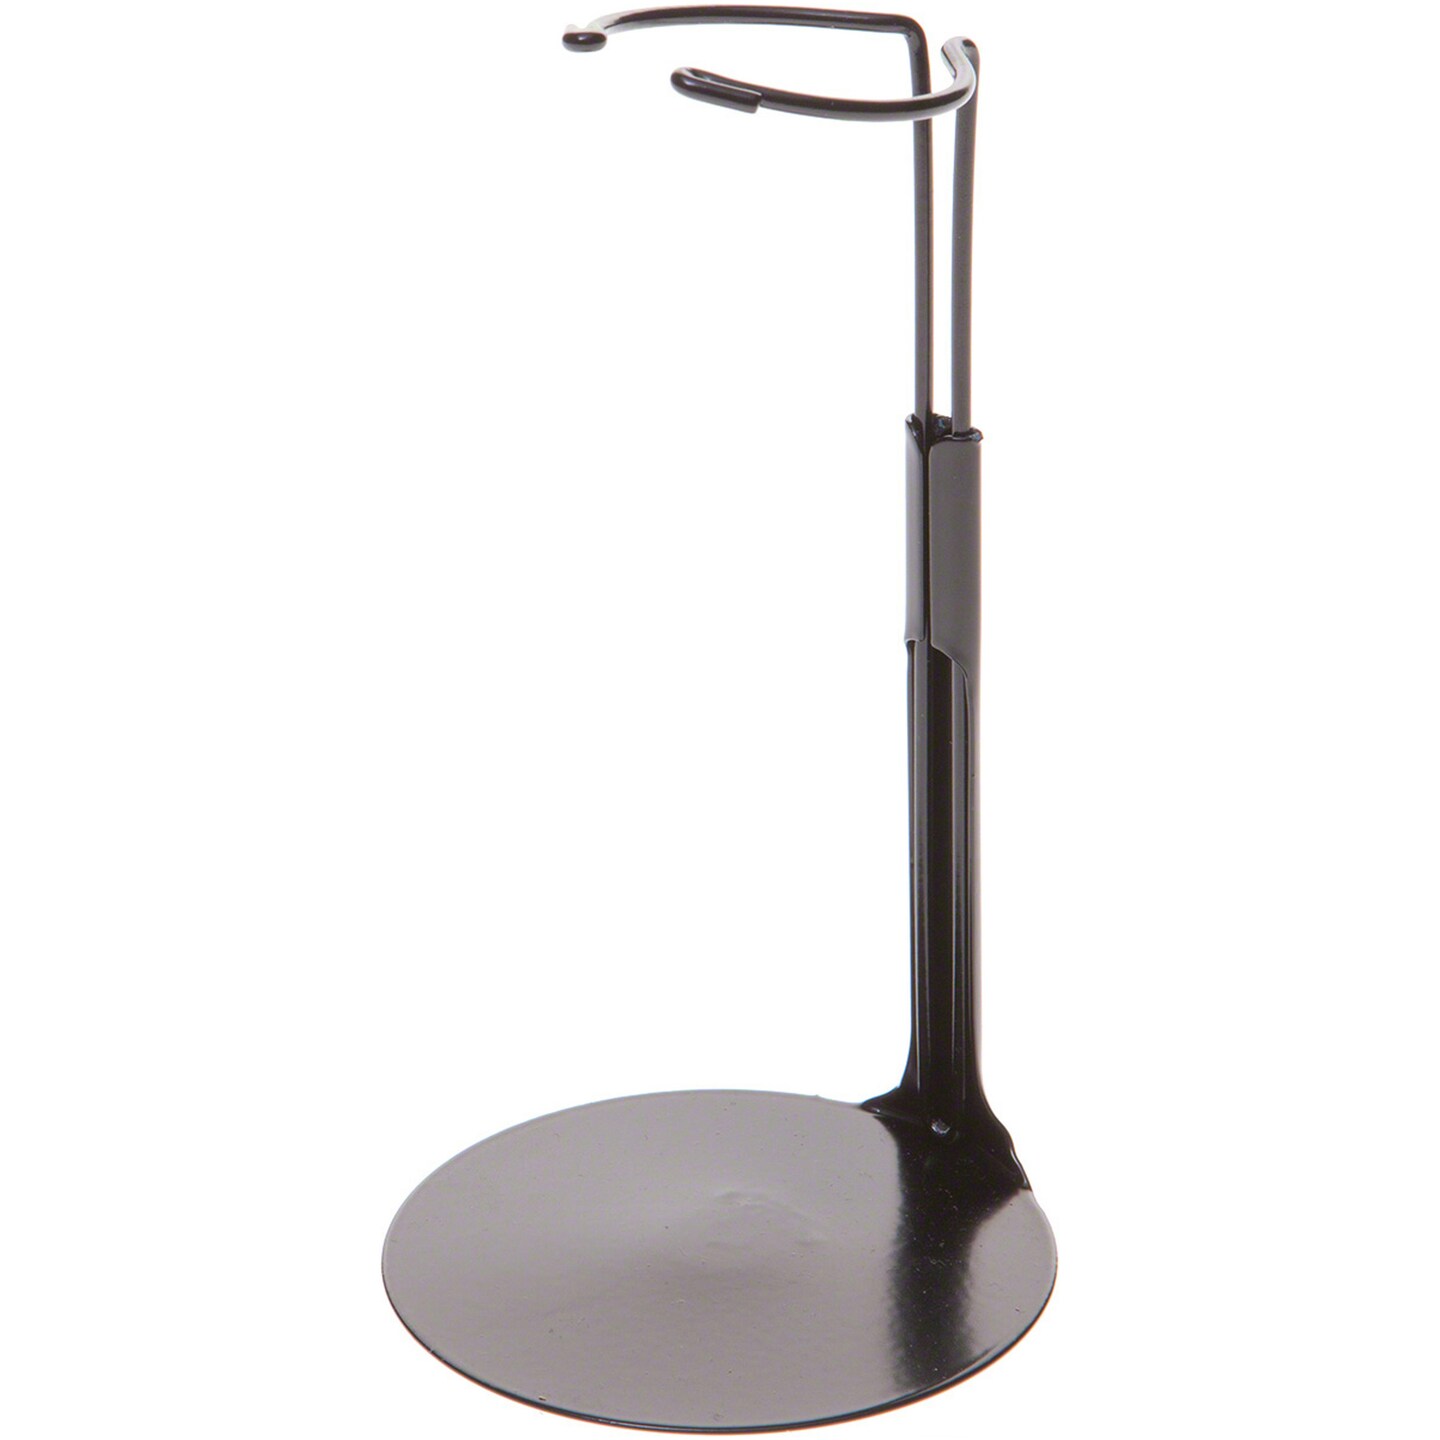 Kaiser 2175 Black Adjustable Doll Stand, fits 8 to 11 inch Dolls or Action Figures, waist width adjusts from 1.375 to 1.75 inches